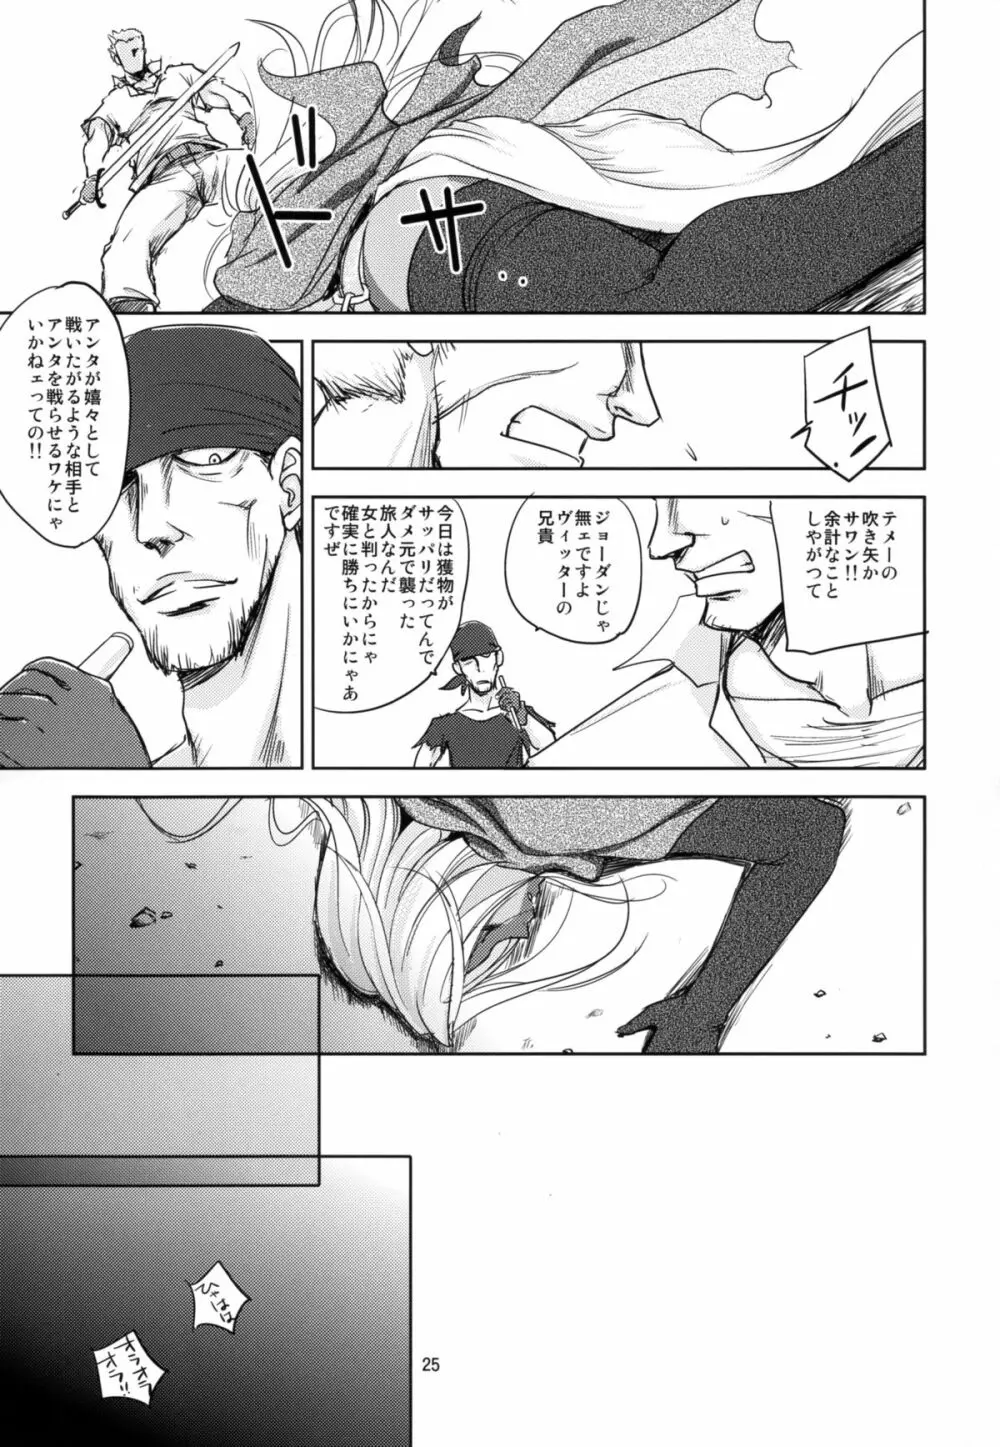 GRASSEN'S WAR ANOTHER STORY Ex #04 ノード侵攻 IV Page.25